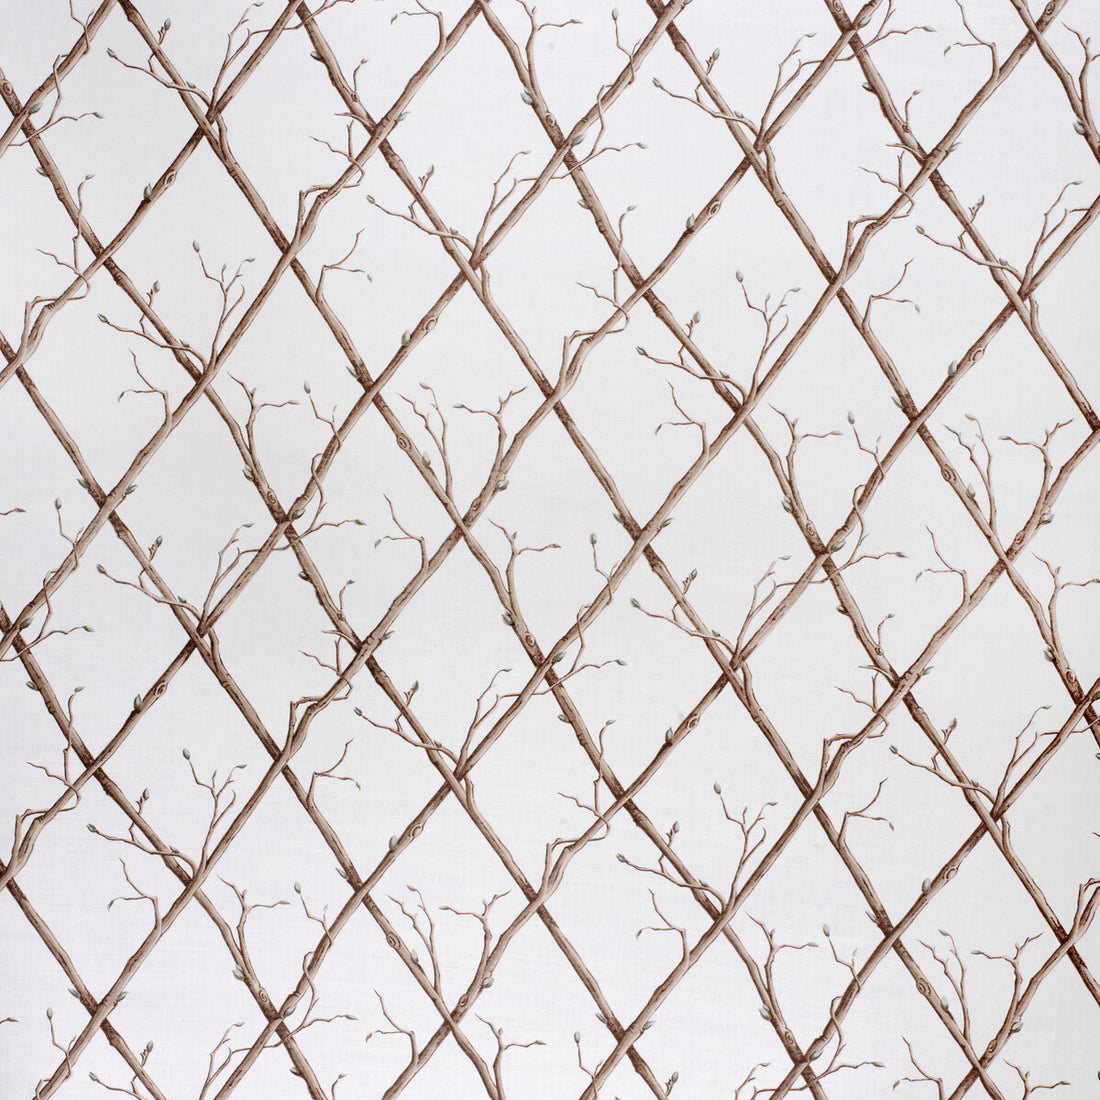 Twig Trellis fabric in brown/white color - pattern 2020166.1016.0 - by Lee Jofa in the Paolo Moschino Fabrics collection